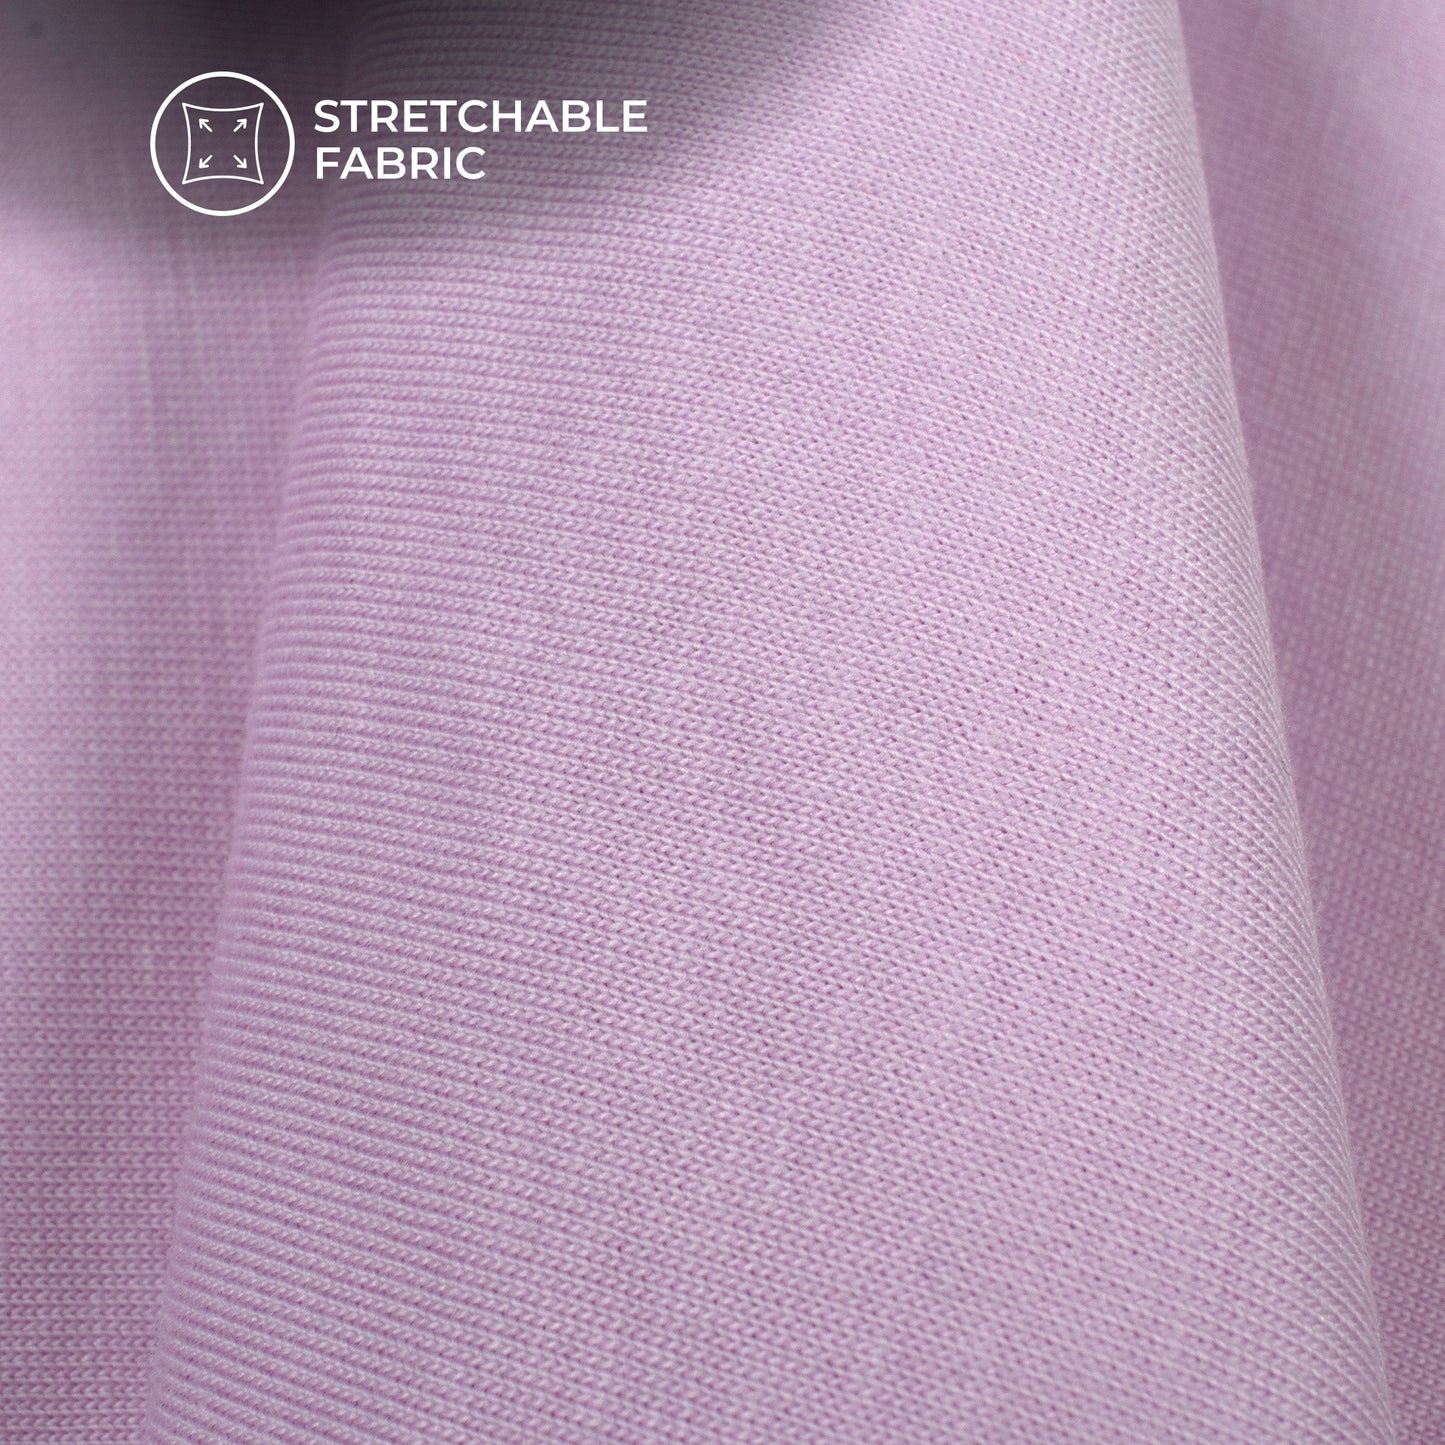 Mauve Purple Stratched Modal Cotton Lycra Fabric (Width 70 Inches)